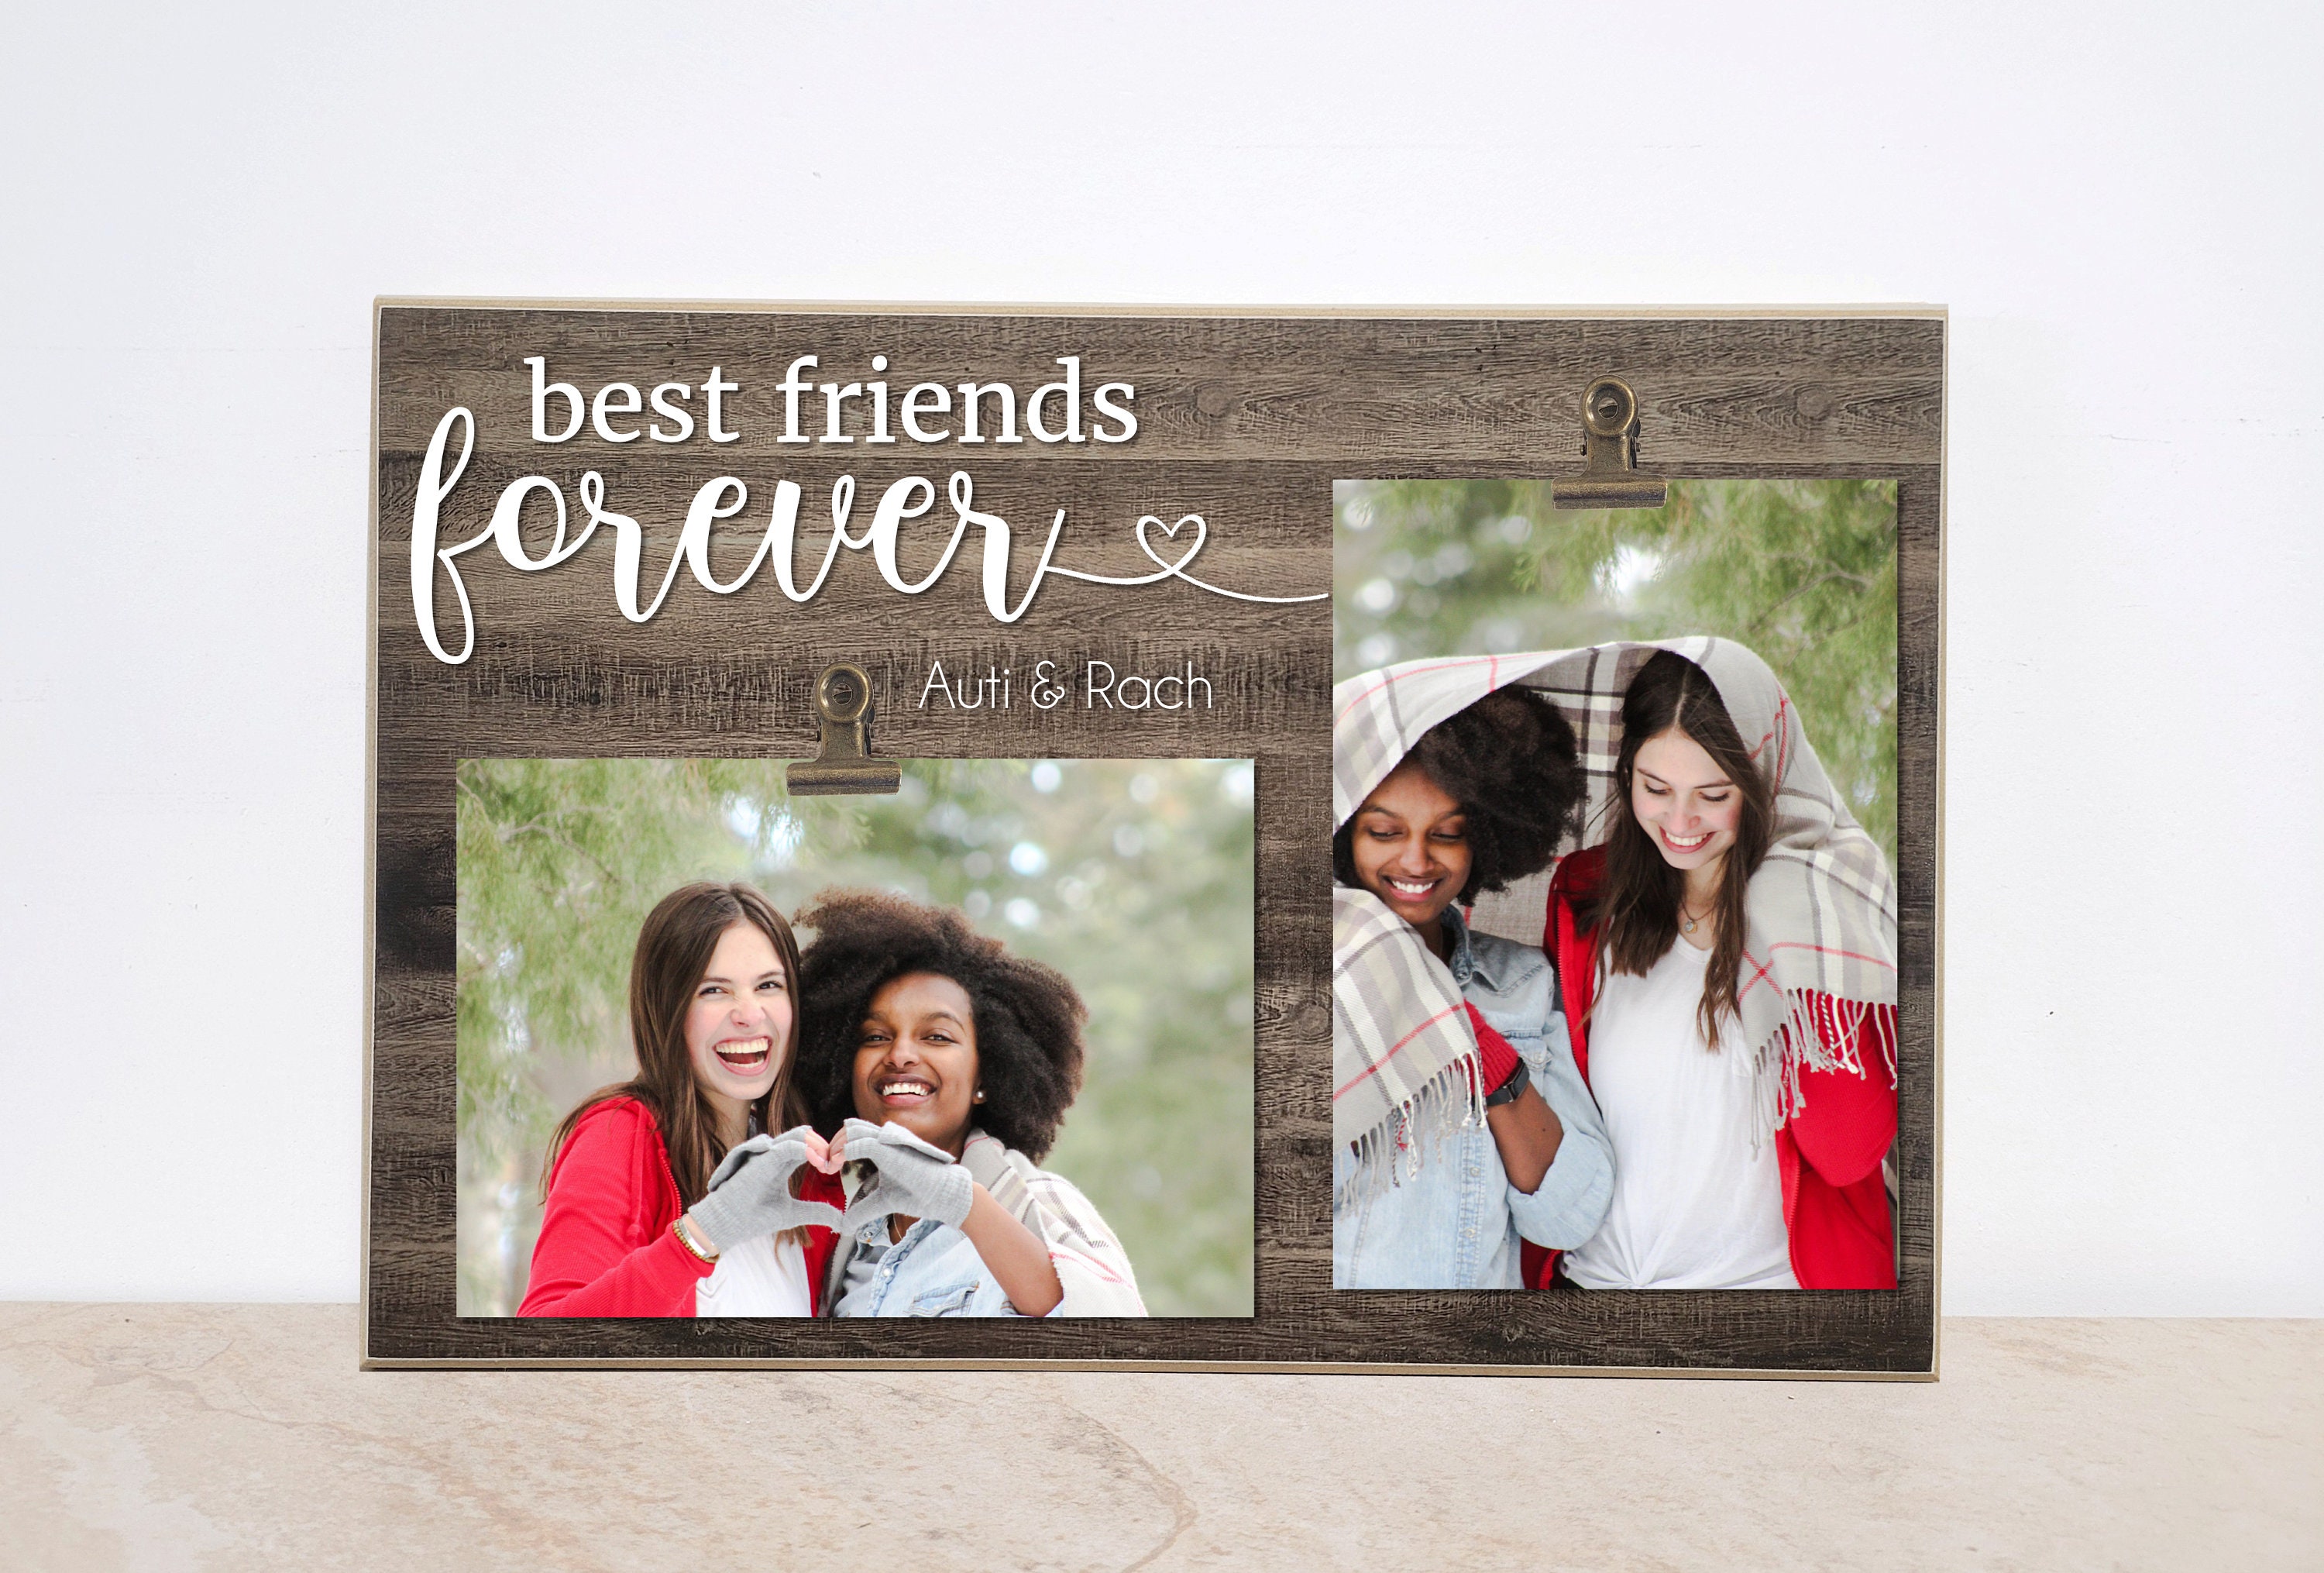 Vetbuosa Best Friend Ideal Gifts for Women Picture Frame, Friendship Gifts  for Women Friends Female BFF, Birthday Valentines Day Gifts for Friends